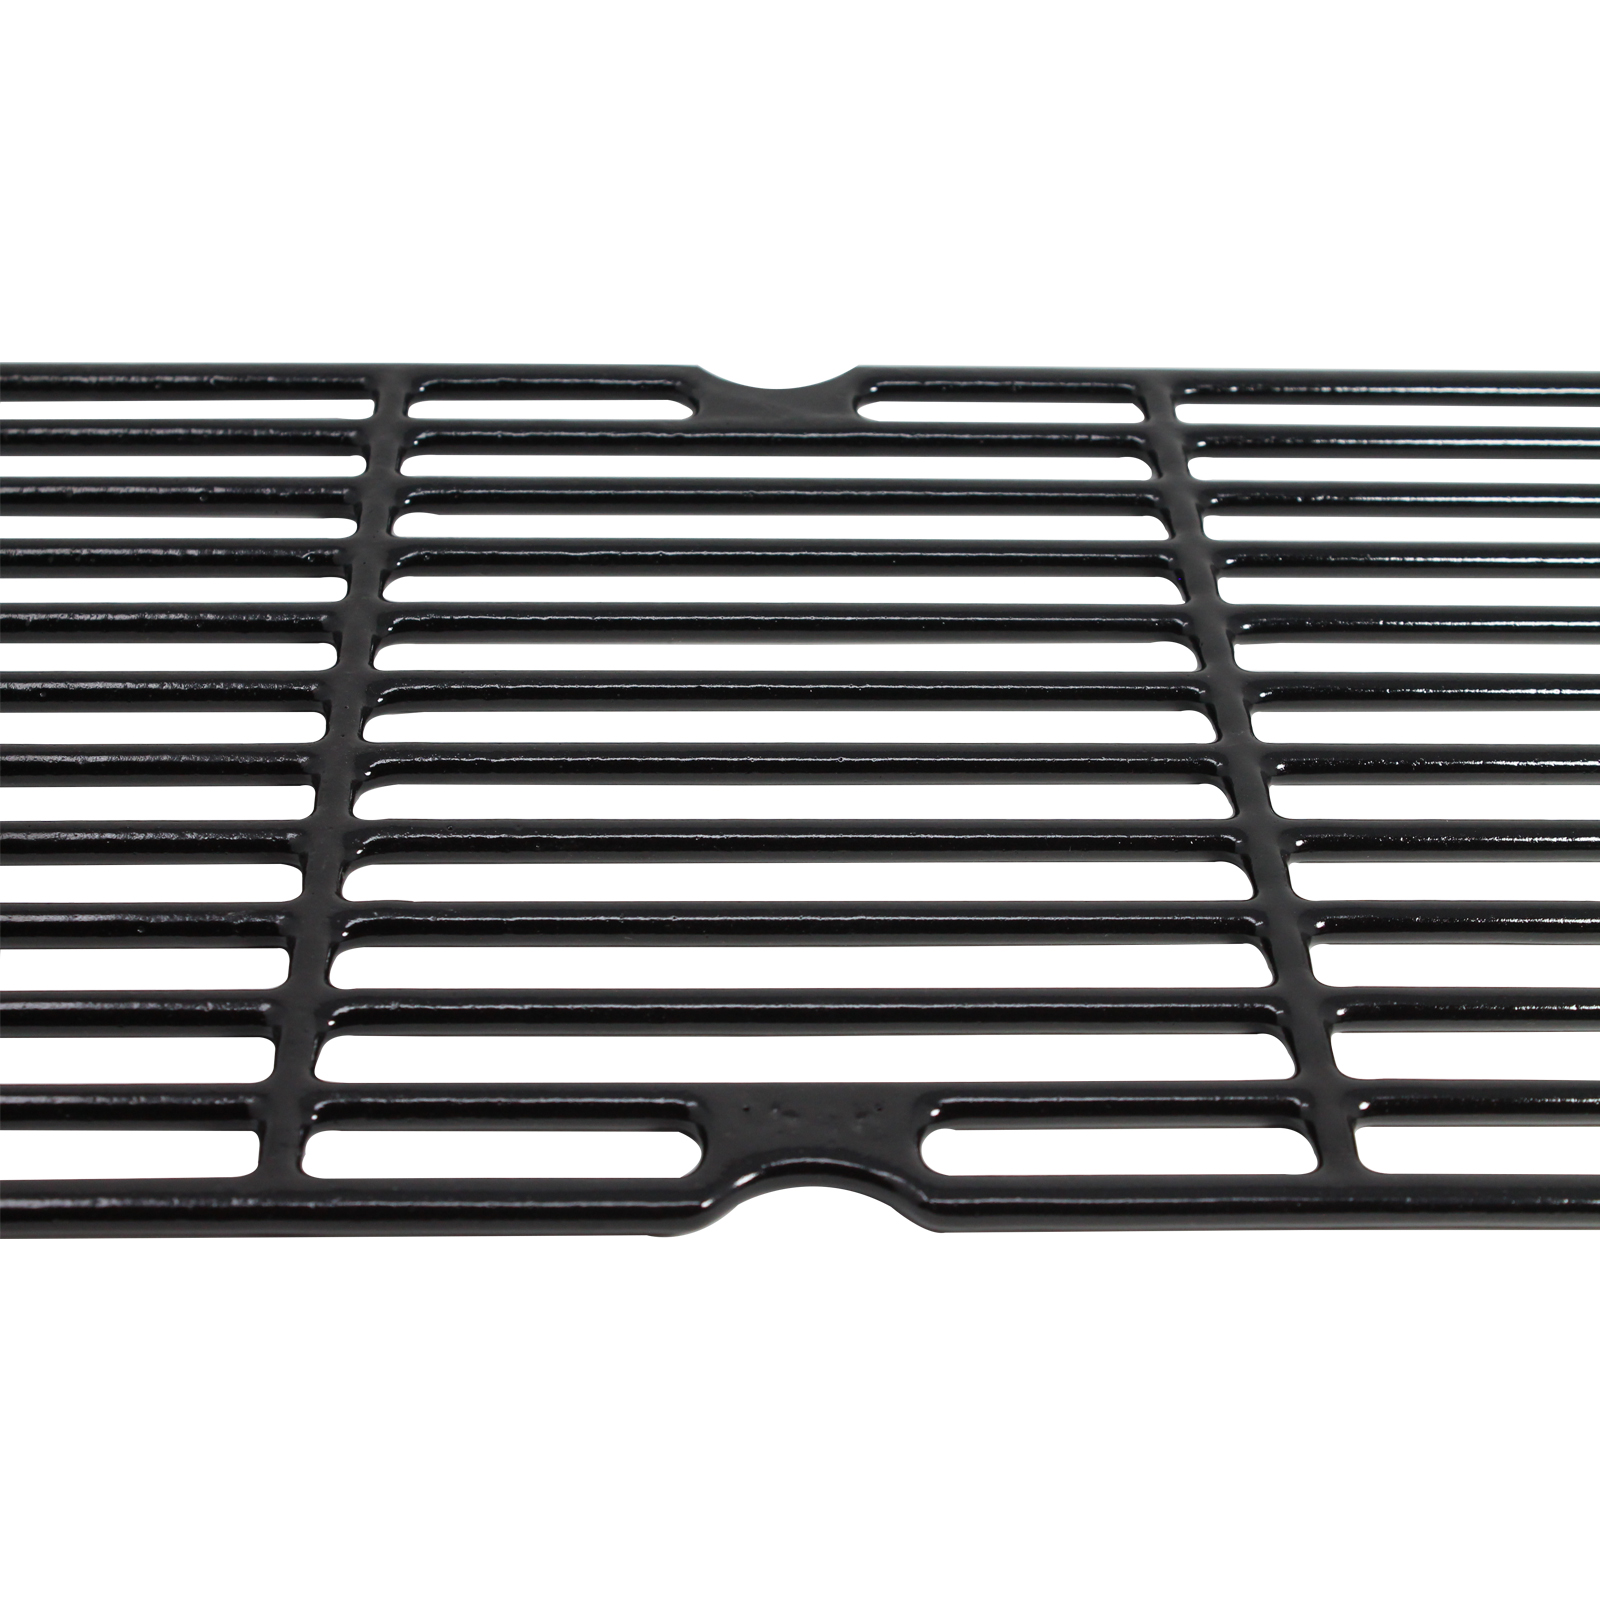 3-Pack BBQ Grill Cooking Grates Replacement Parts for Broil King 987747 - Compatible Barbeque Cast Iron Grid 16 3/4" - image 3 of 4